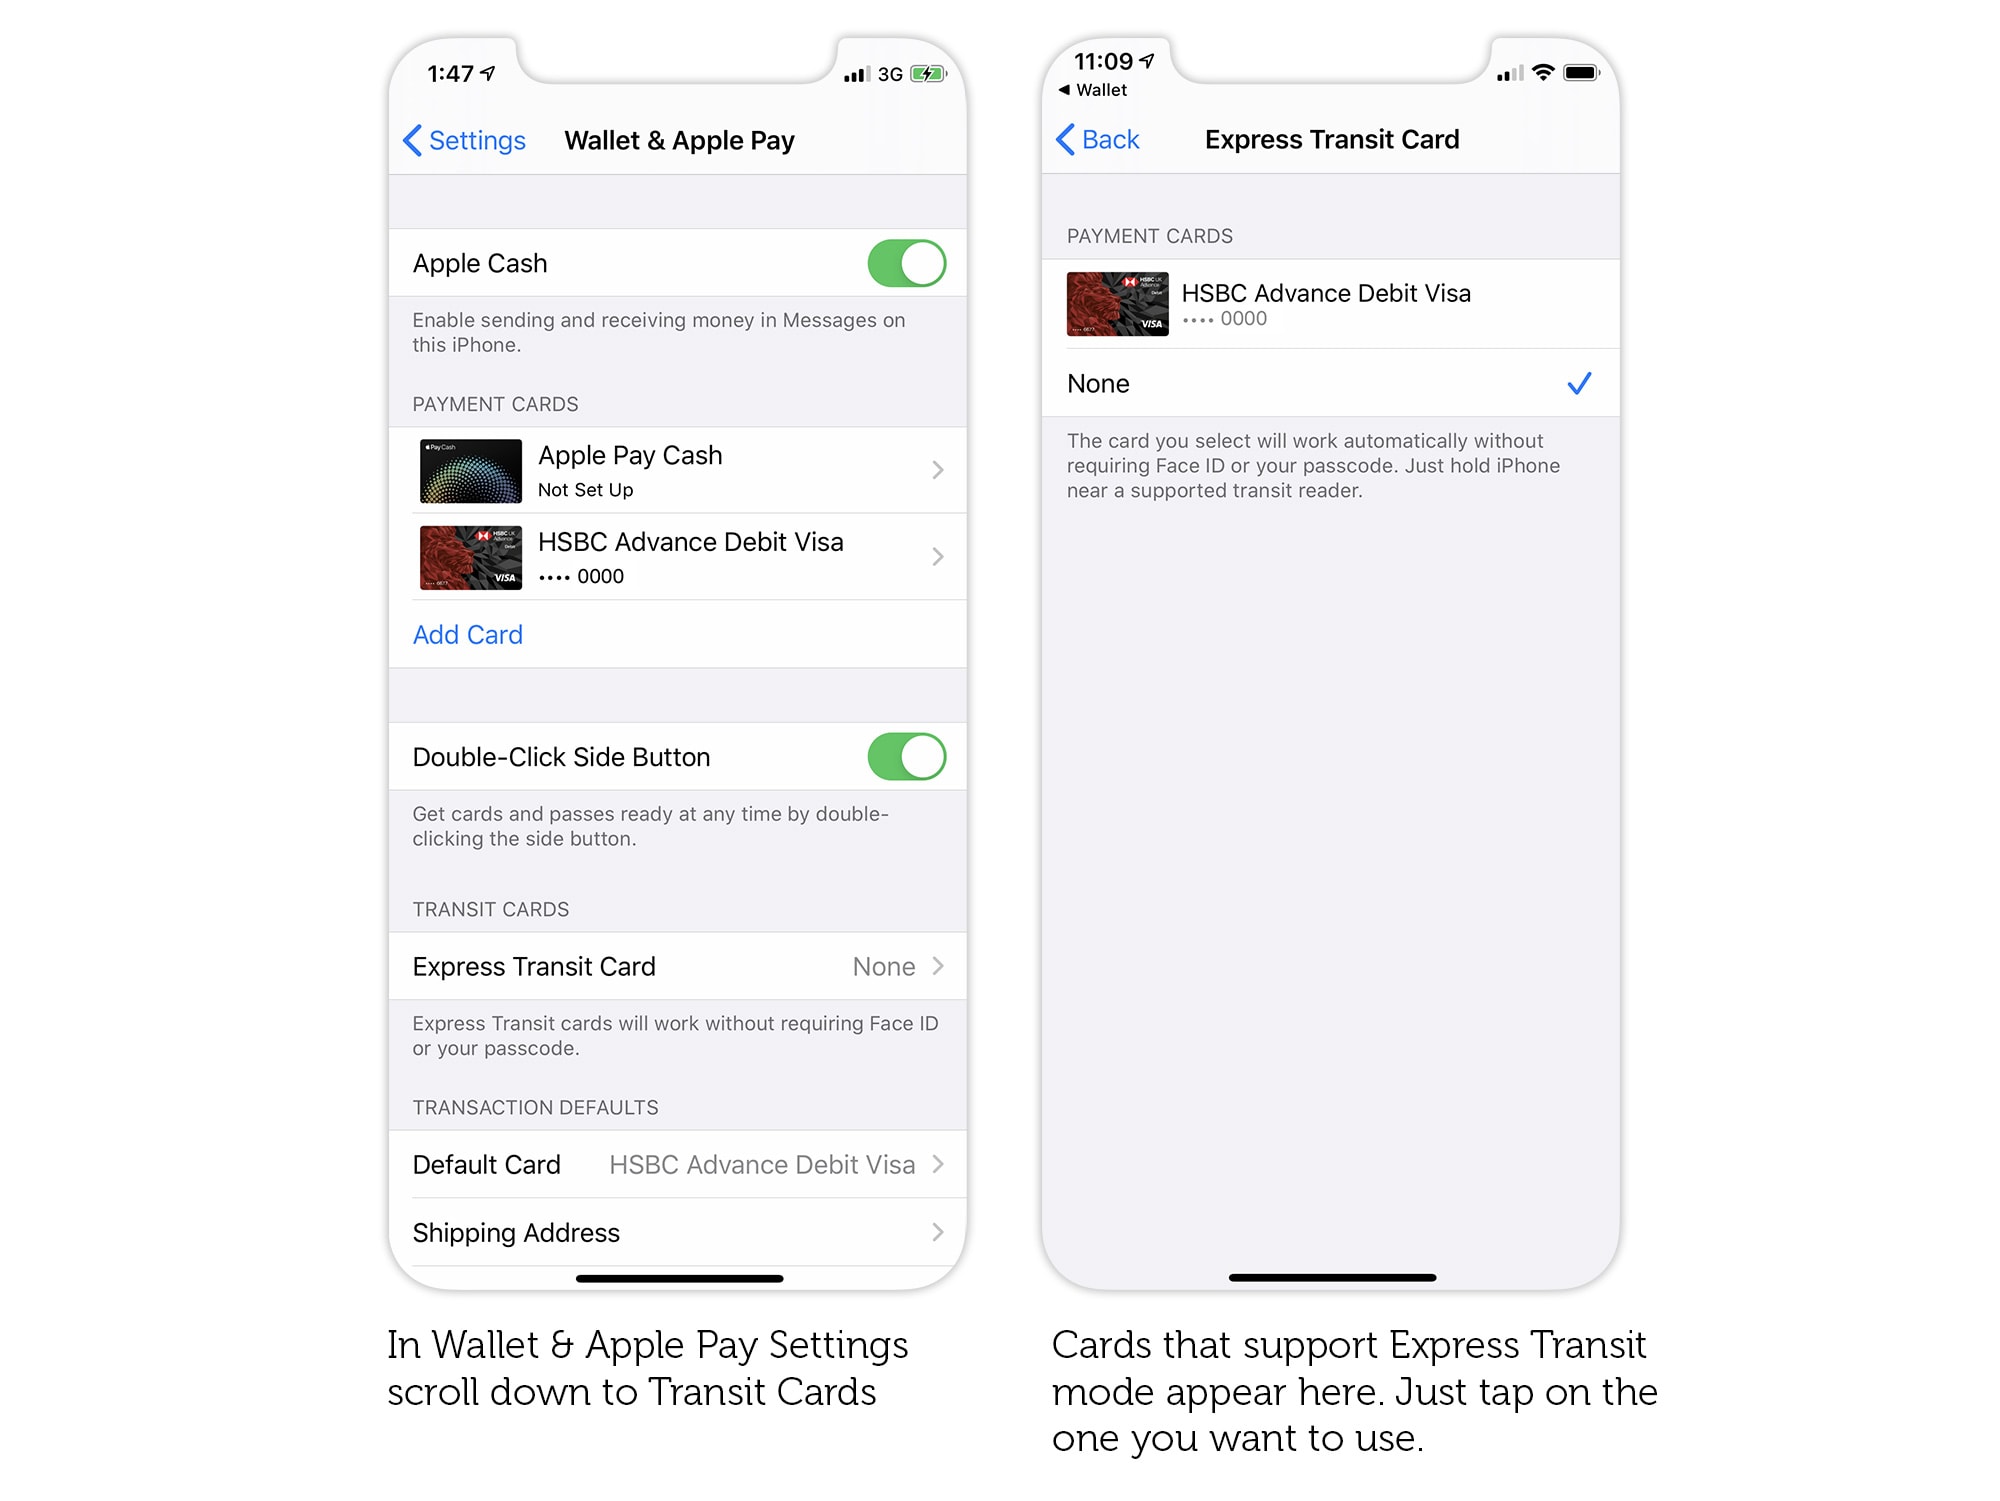 How to select an Express Transit card on iPhone